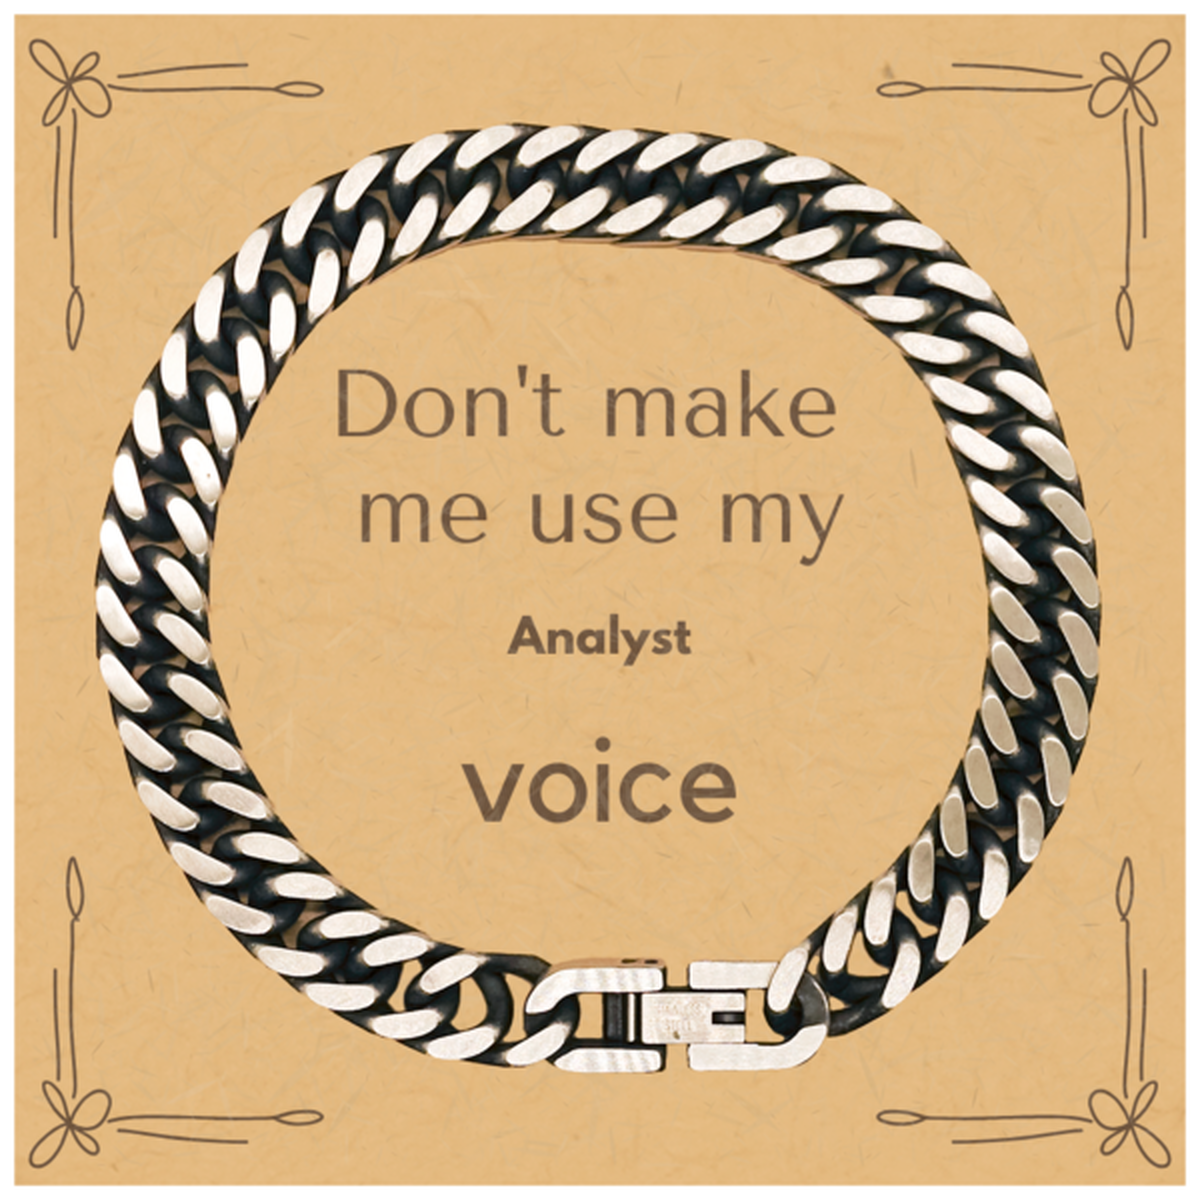 Don't make me use my Analyst voice, Sarcasm Analyst Card Gifts, Christmas Analyst Cuban Link Chain Bracelet Birthday Unique Gifts For Analyst Coworkers, Men, Women, Colleague, Friends